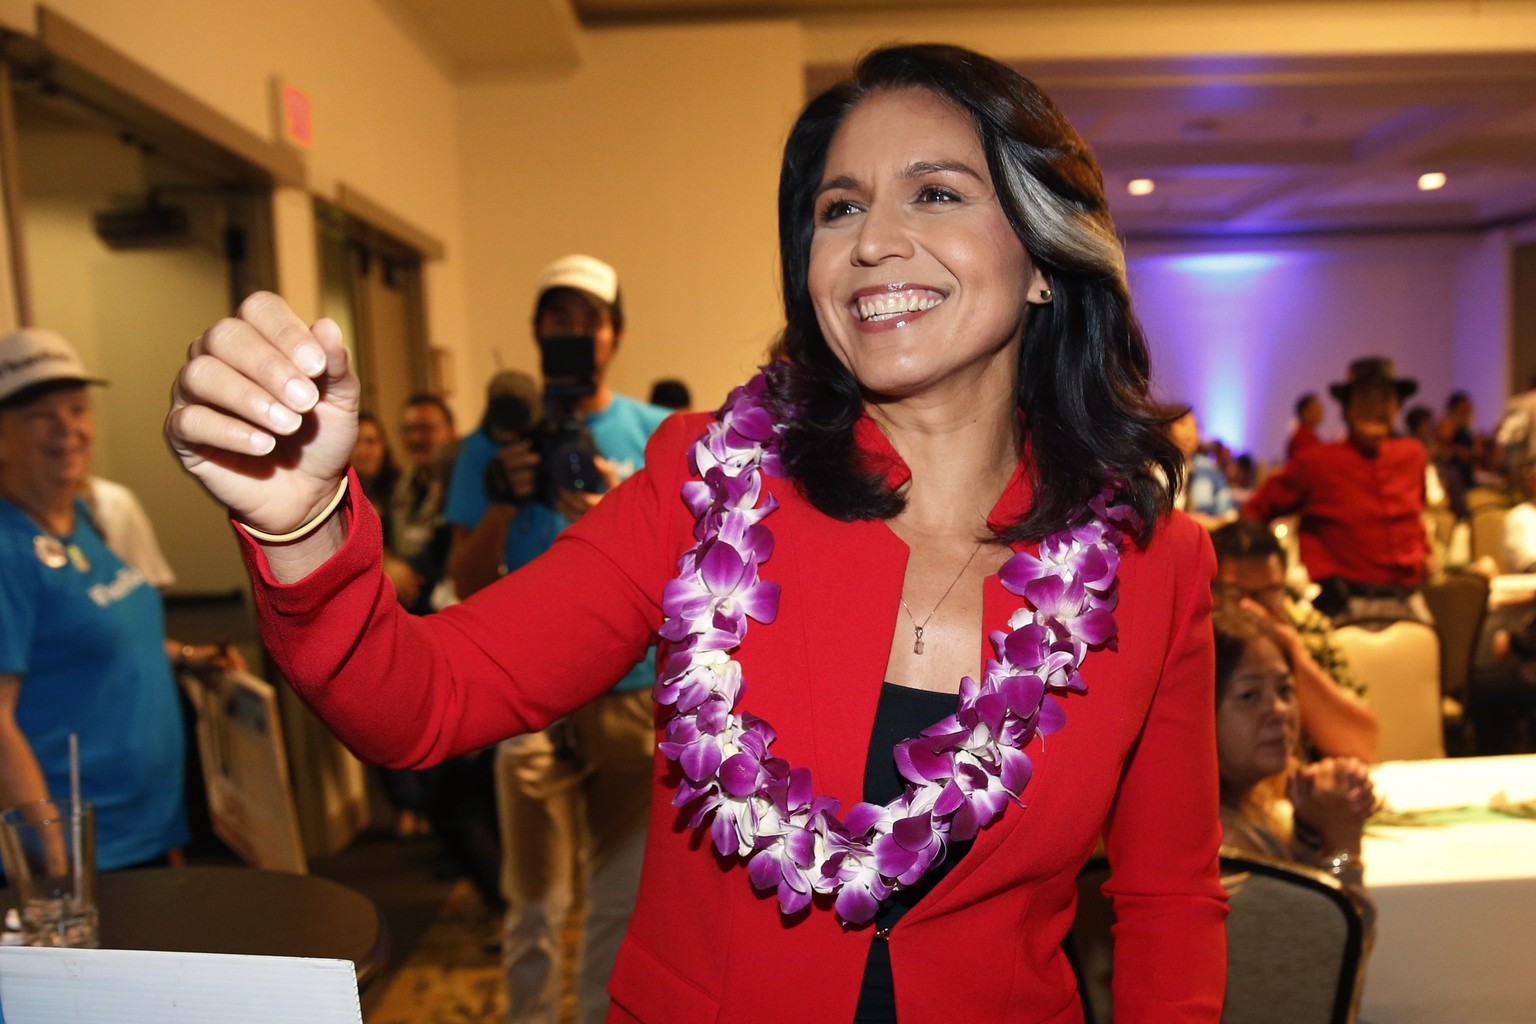 FILE - In this Nov. 6, 2018, file photo, Rep. Tulsi Gabbard, D-Hawaii, greets supporters in Honolulu. The 2020 presidential election already includes more than a half-dozen Democrats whose identities  ...